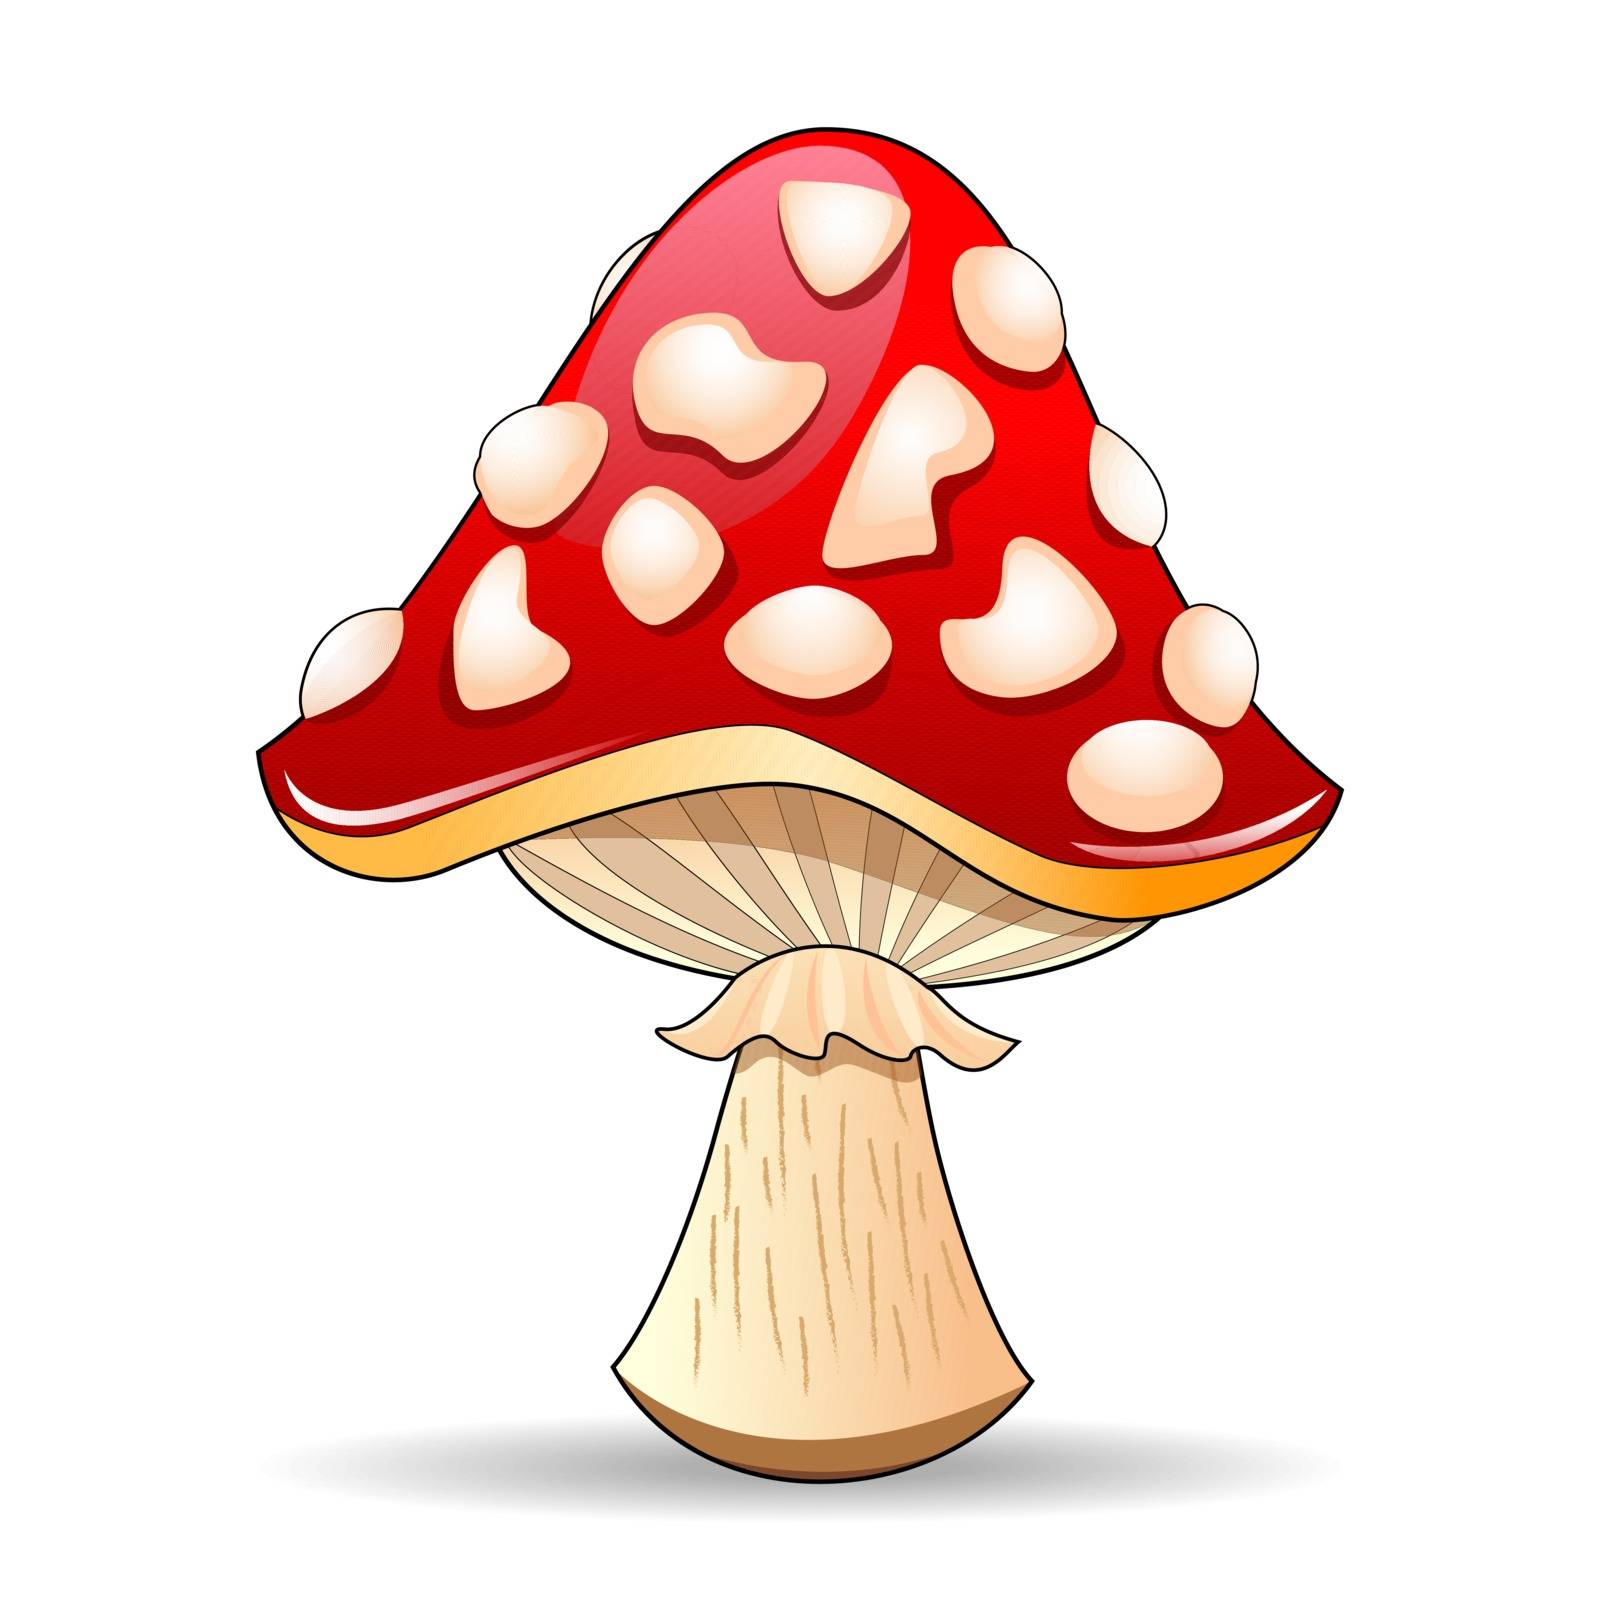 Mushroom amanita. Spotted red mushroom on a white background. Mushroom hat red with white spots.